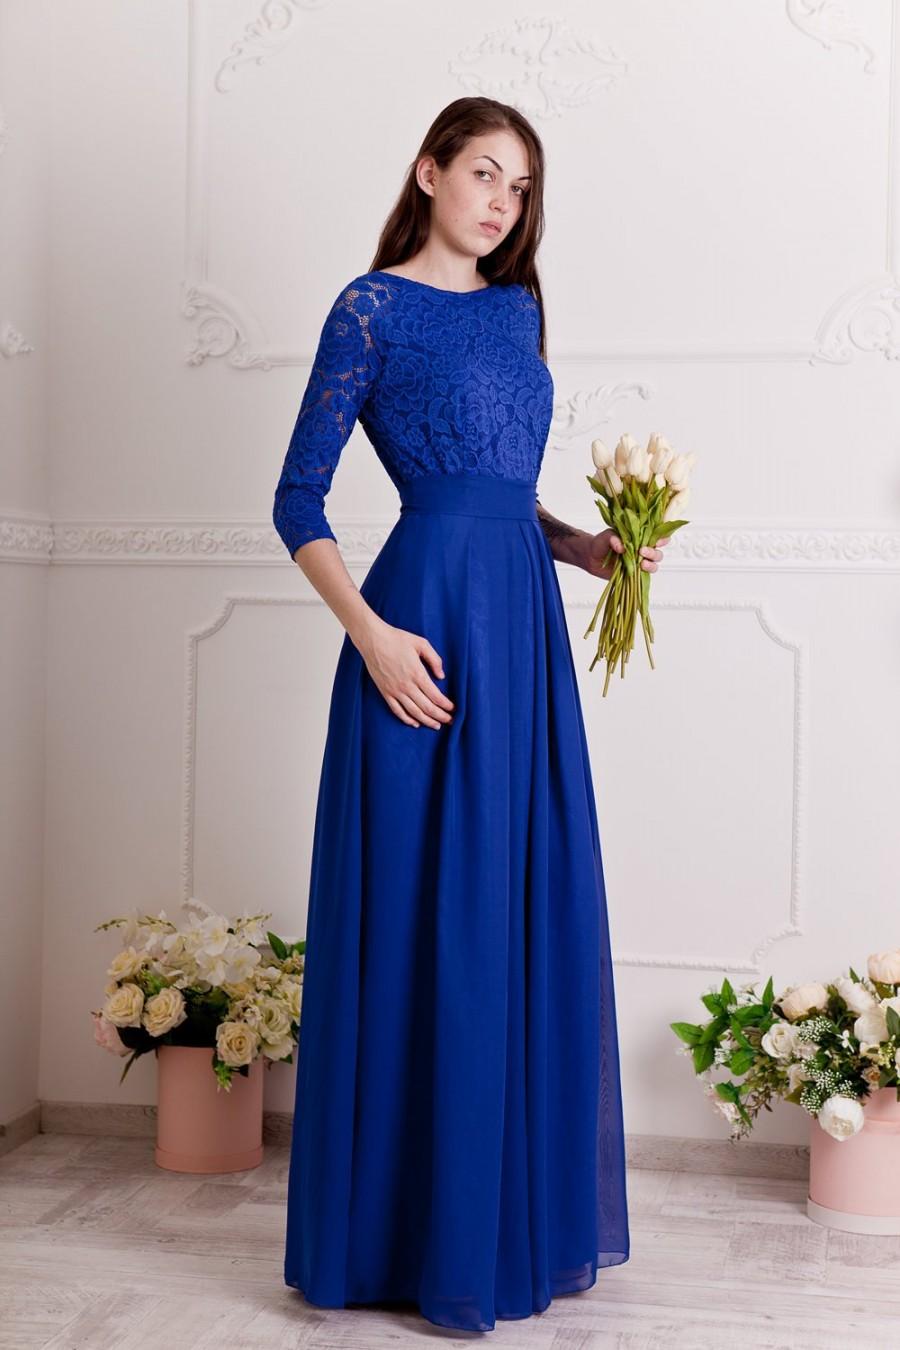 Wedding - Cobalt blue bridesmaid dress long. Floral lace formal gown with sleeves. Modest evening dress plus size.Blue mother of the groom dress